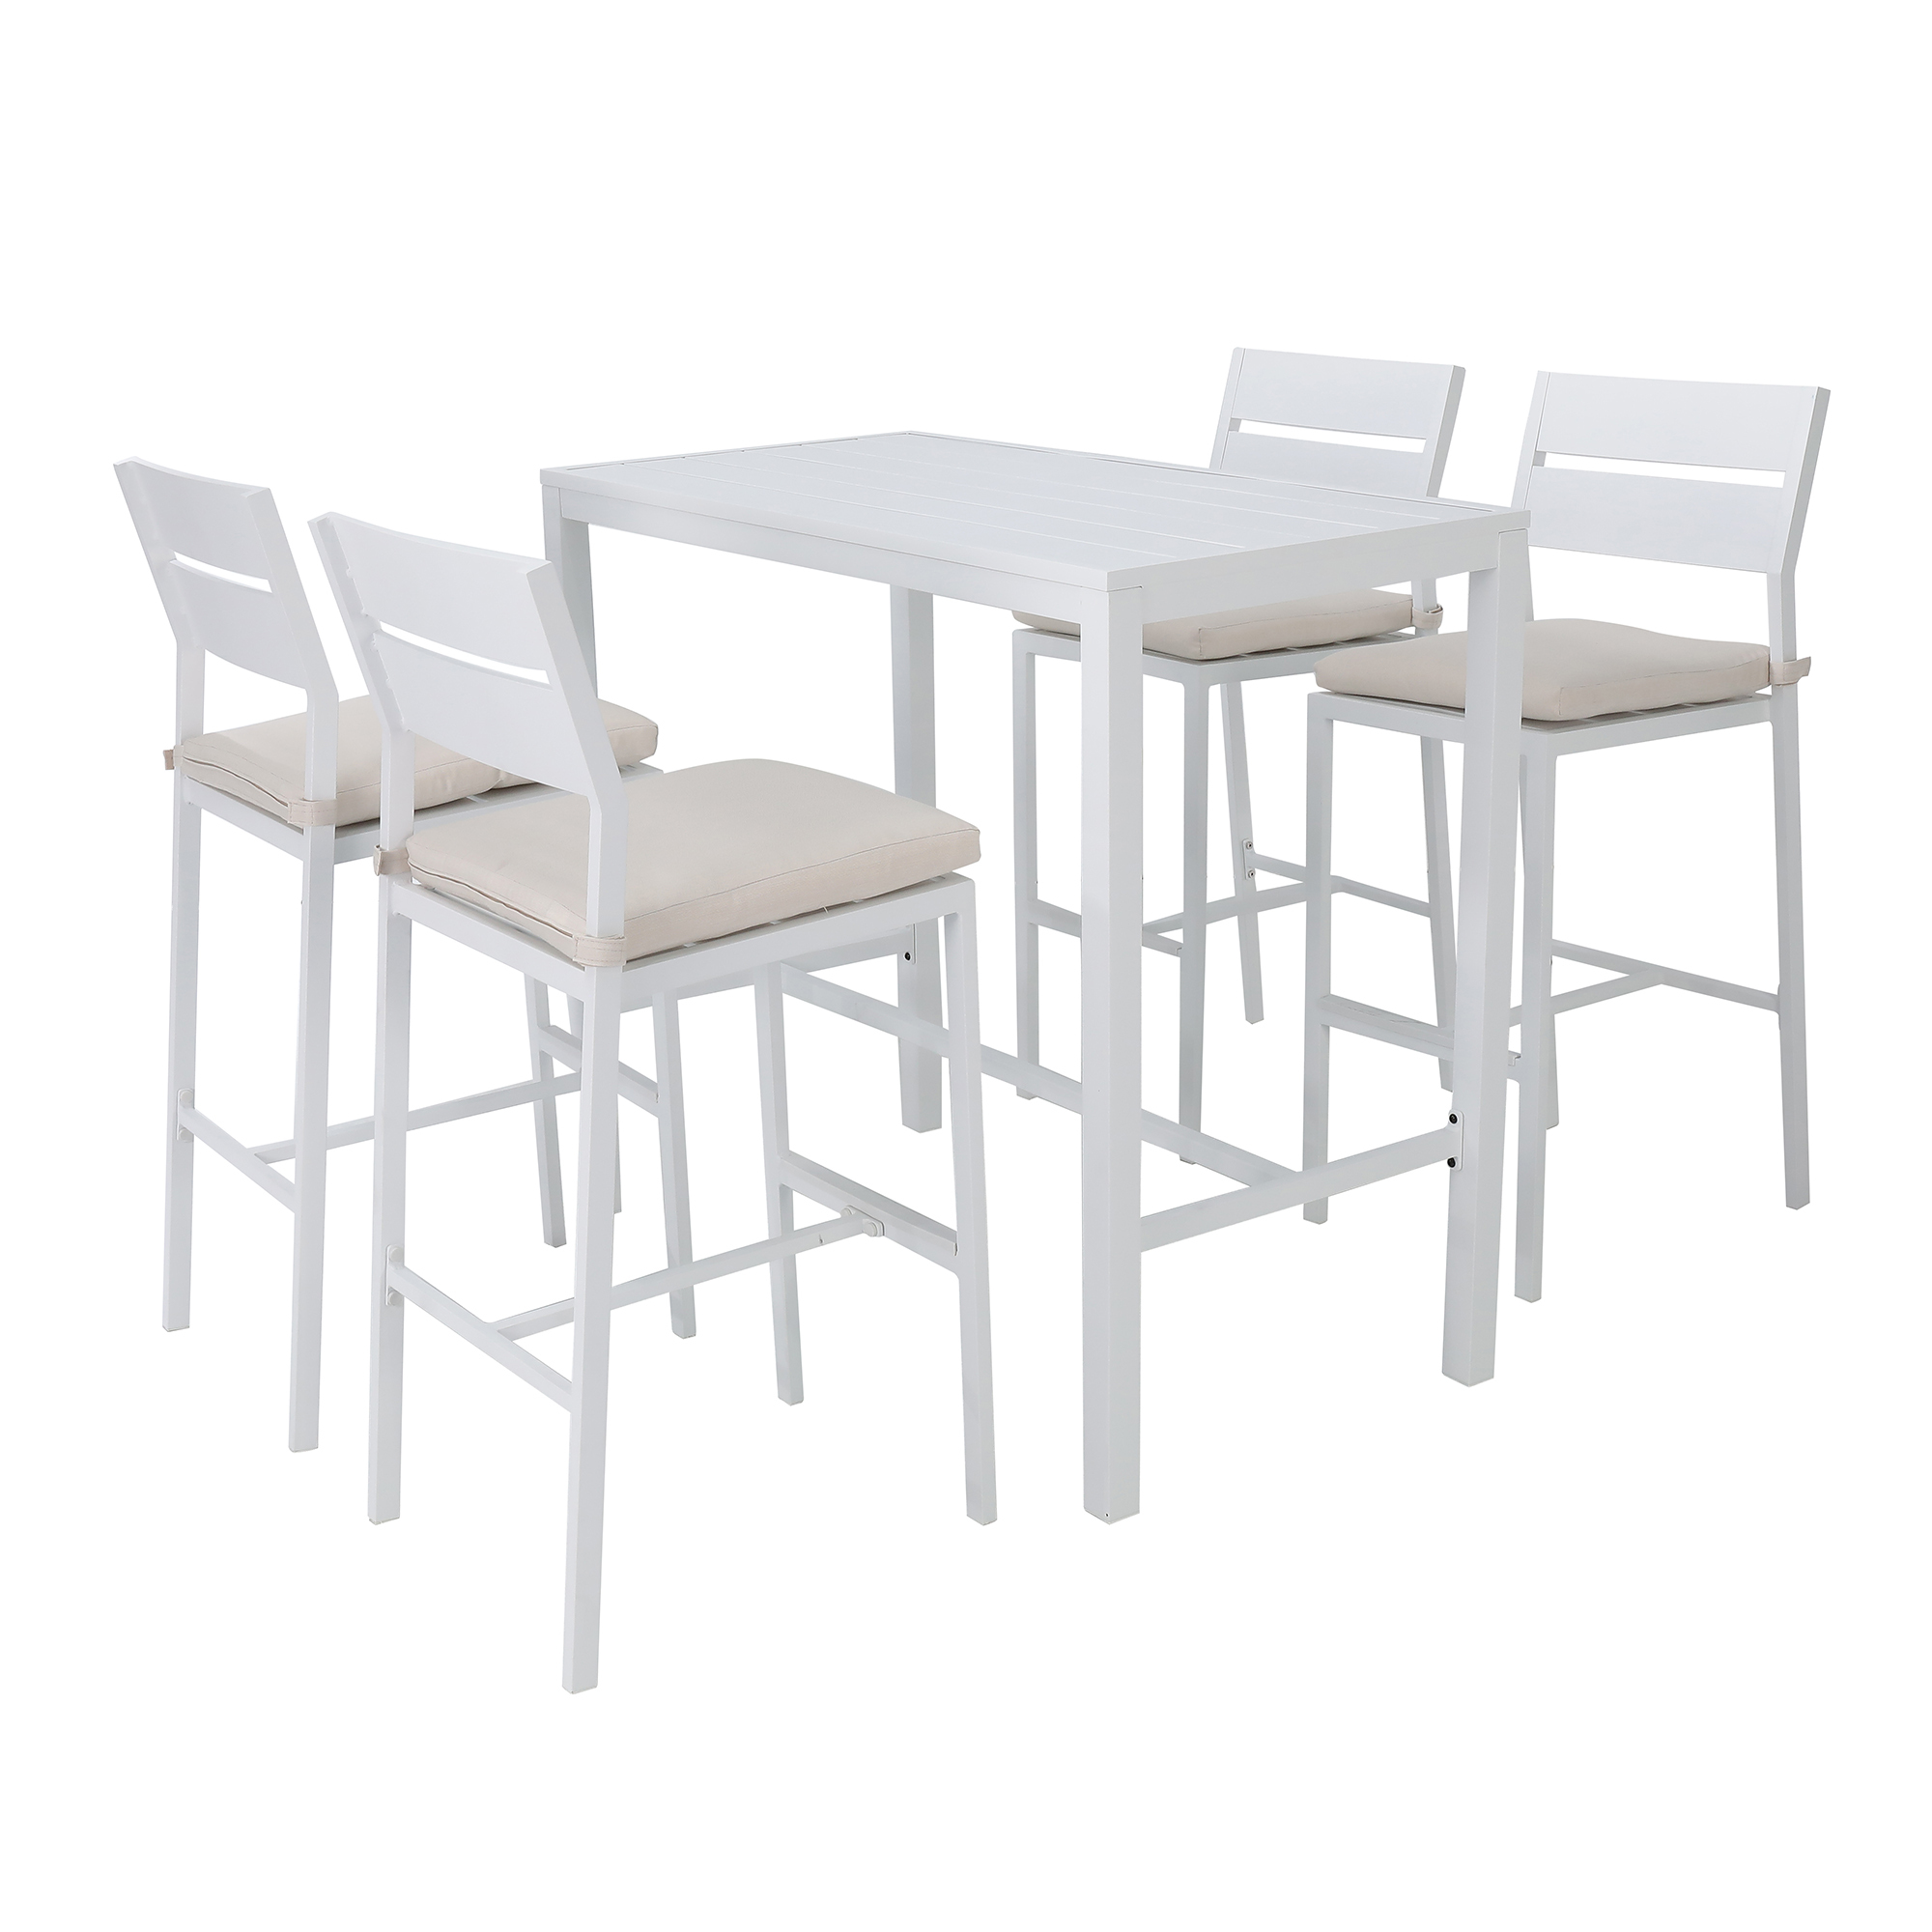 Temple Webster 4 Seater Kos Aluminium, Outdoor Bar Set With Stools